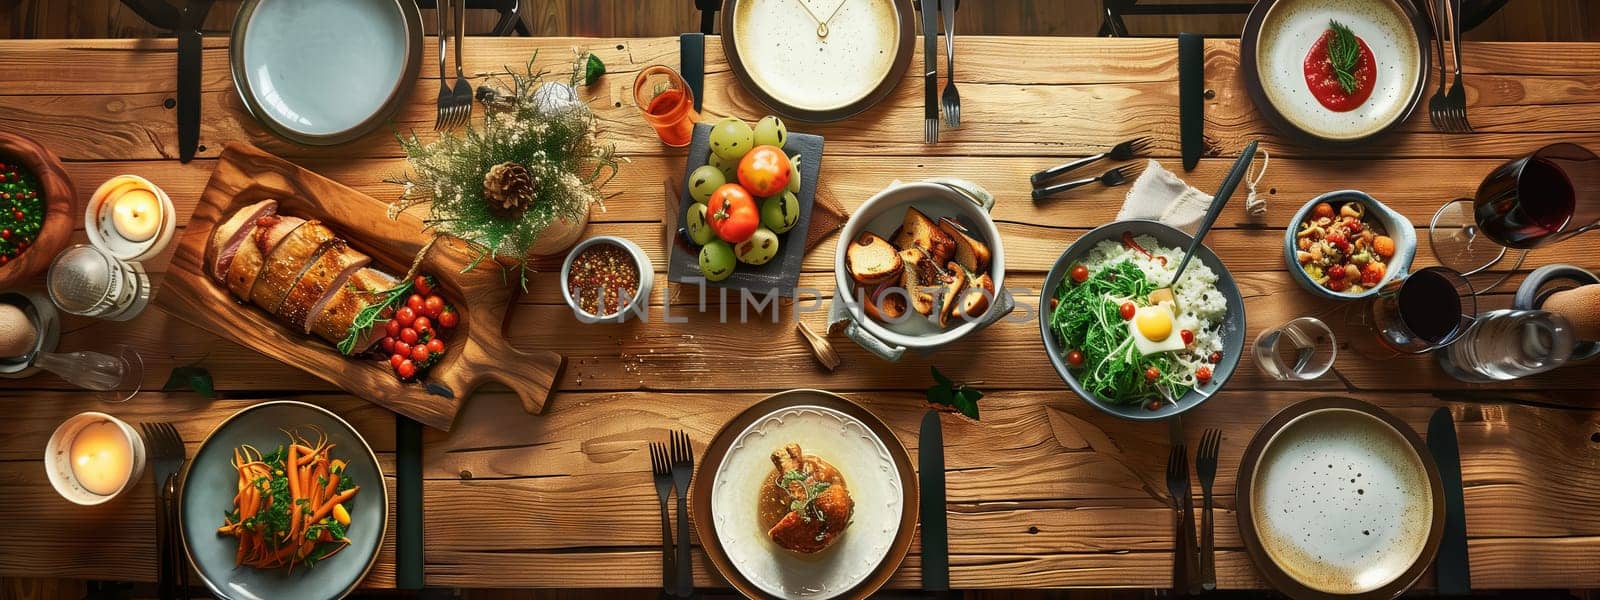 A hardwood table adorned with plantbased cuisine in beautiful tableware by richwolf